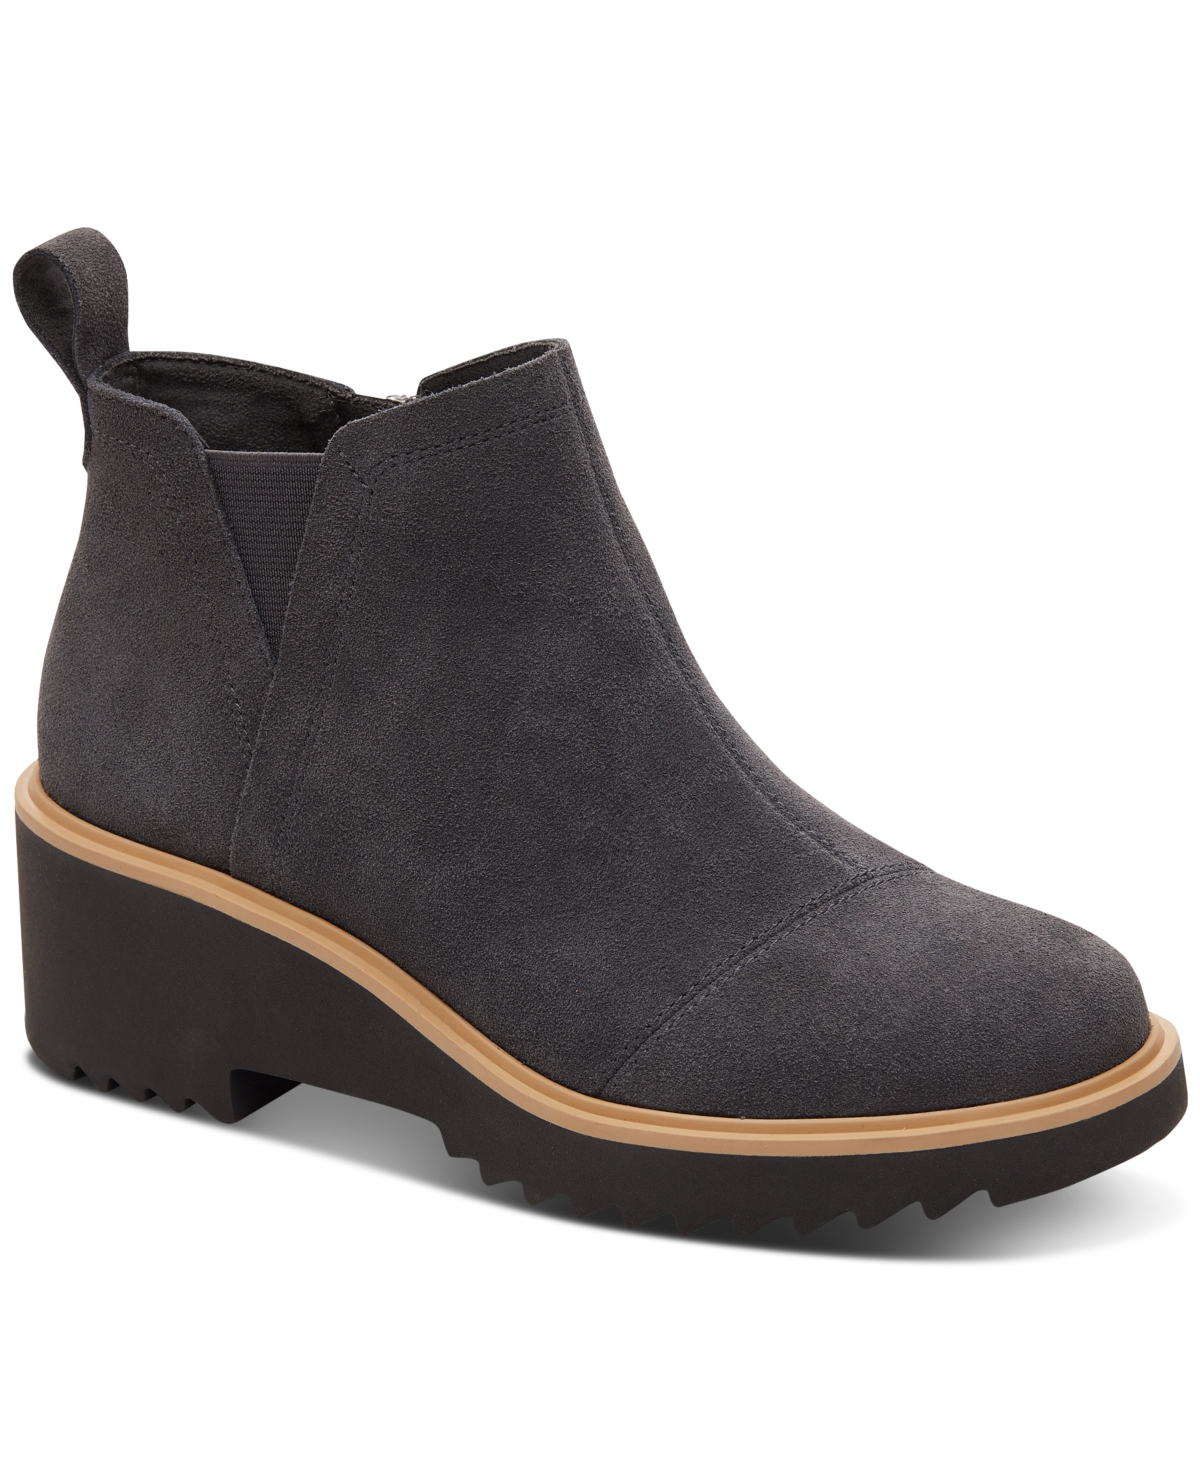 Toms Women's Maude Round Toe Lug Sole Booties In Forged Iron Suede